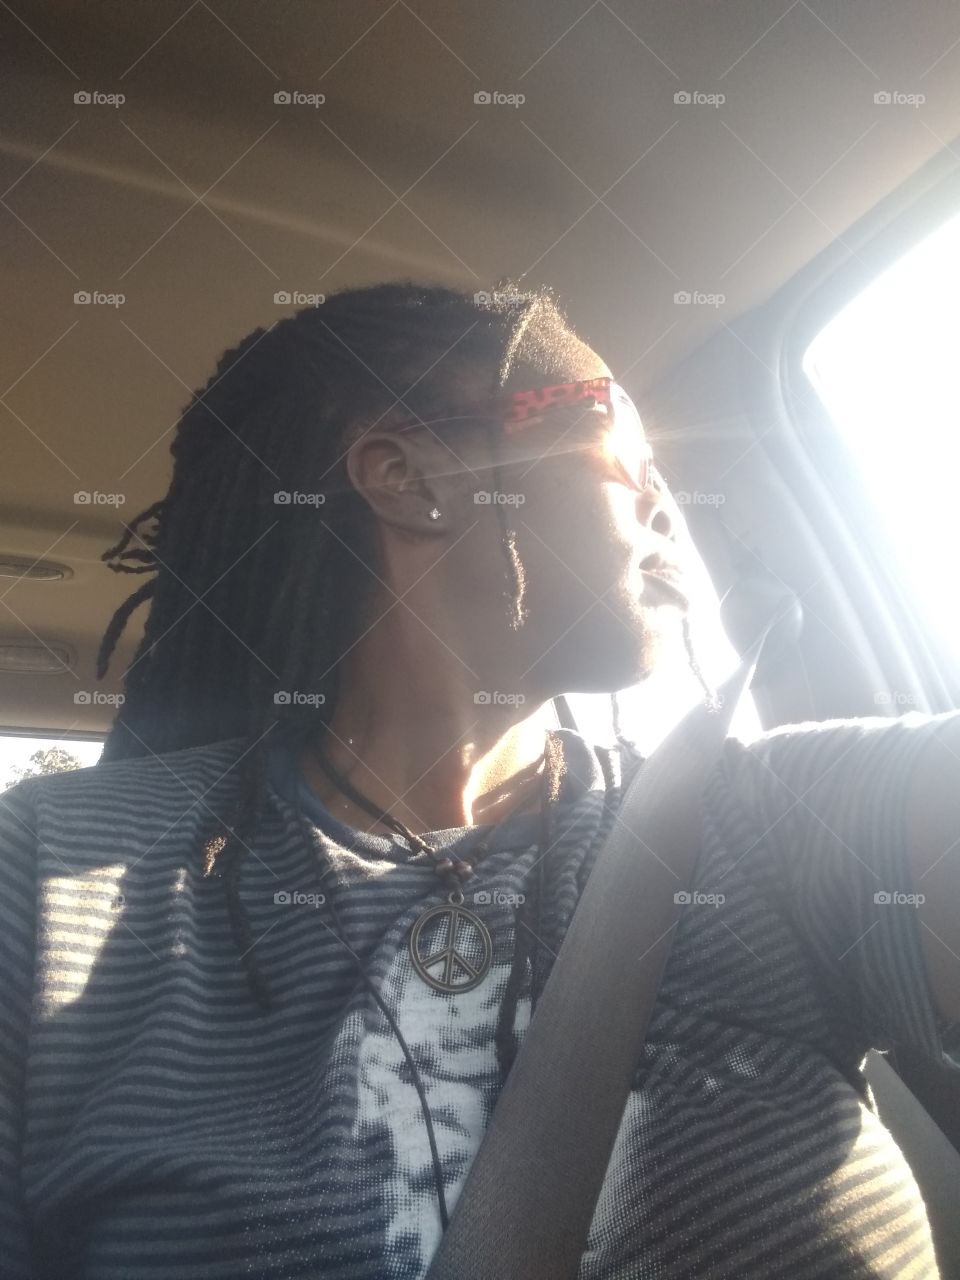 riding in my Jeep 😁 enjoying the 🌞 trying to catch a view where my skin is kissed by the sun rays